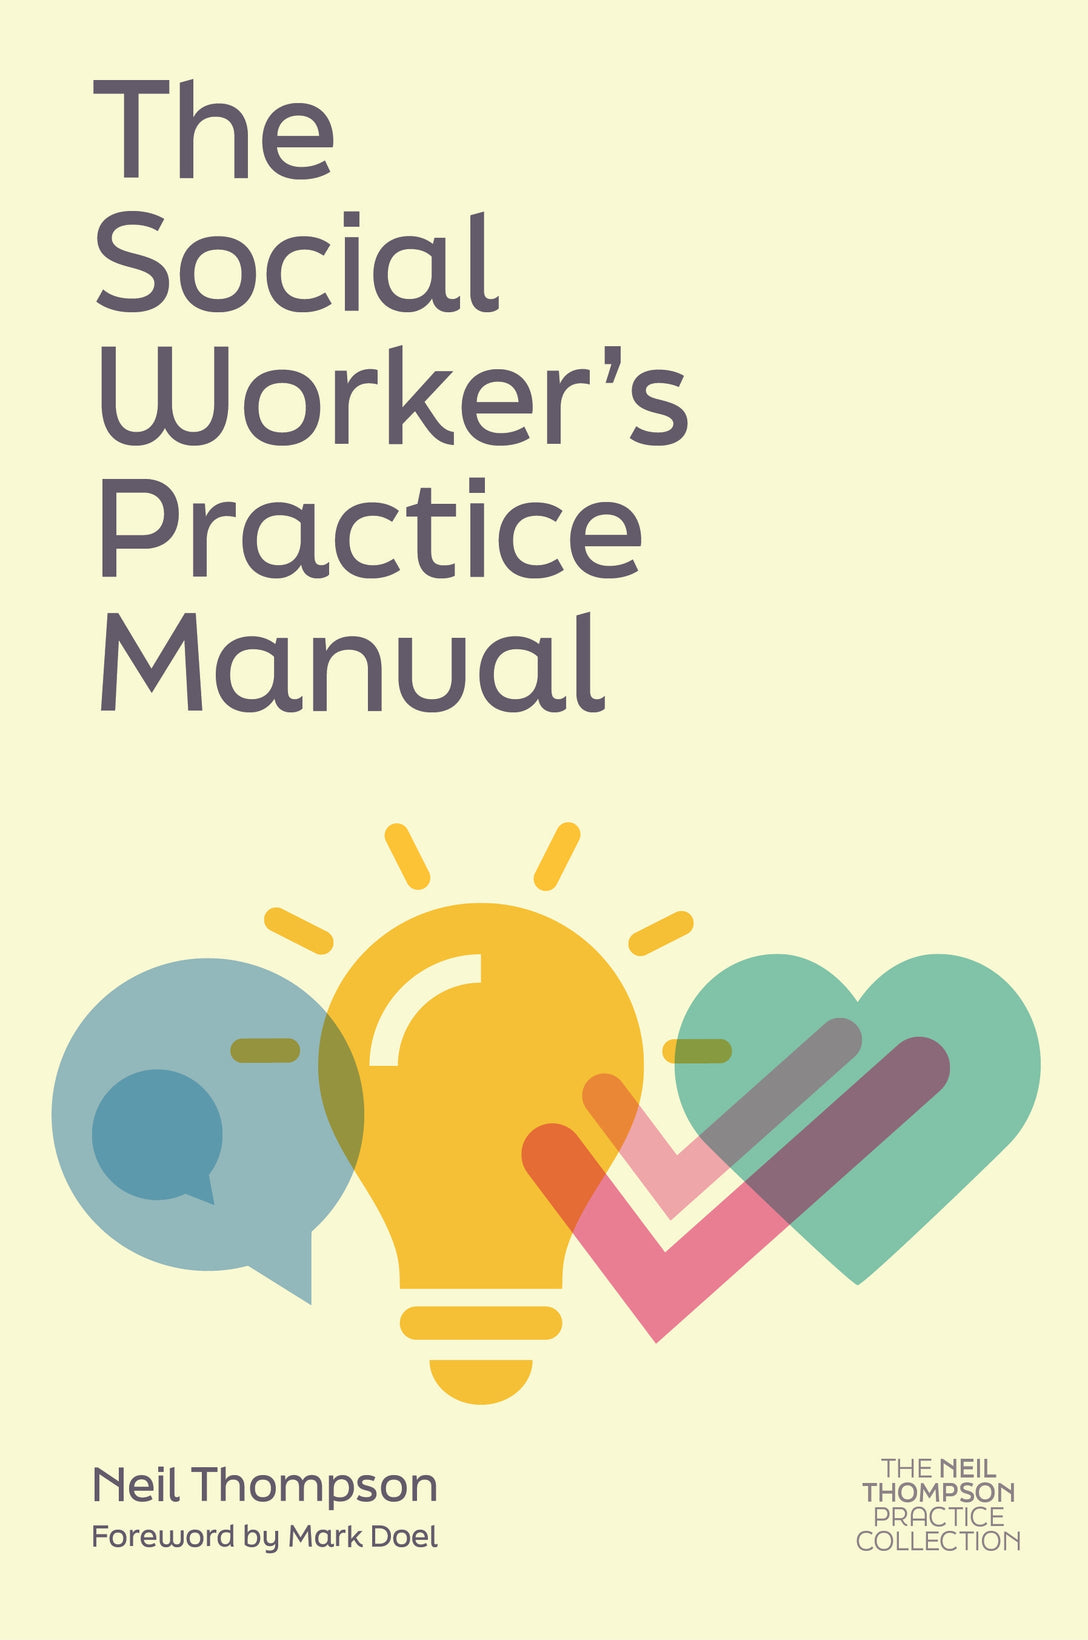 The Social Worker's Practice Manual by Neil Thompson, Mark Doel